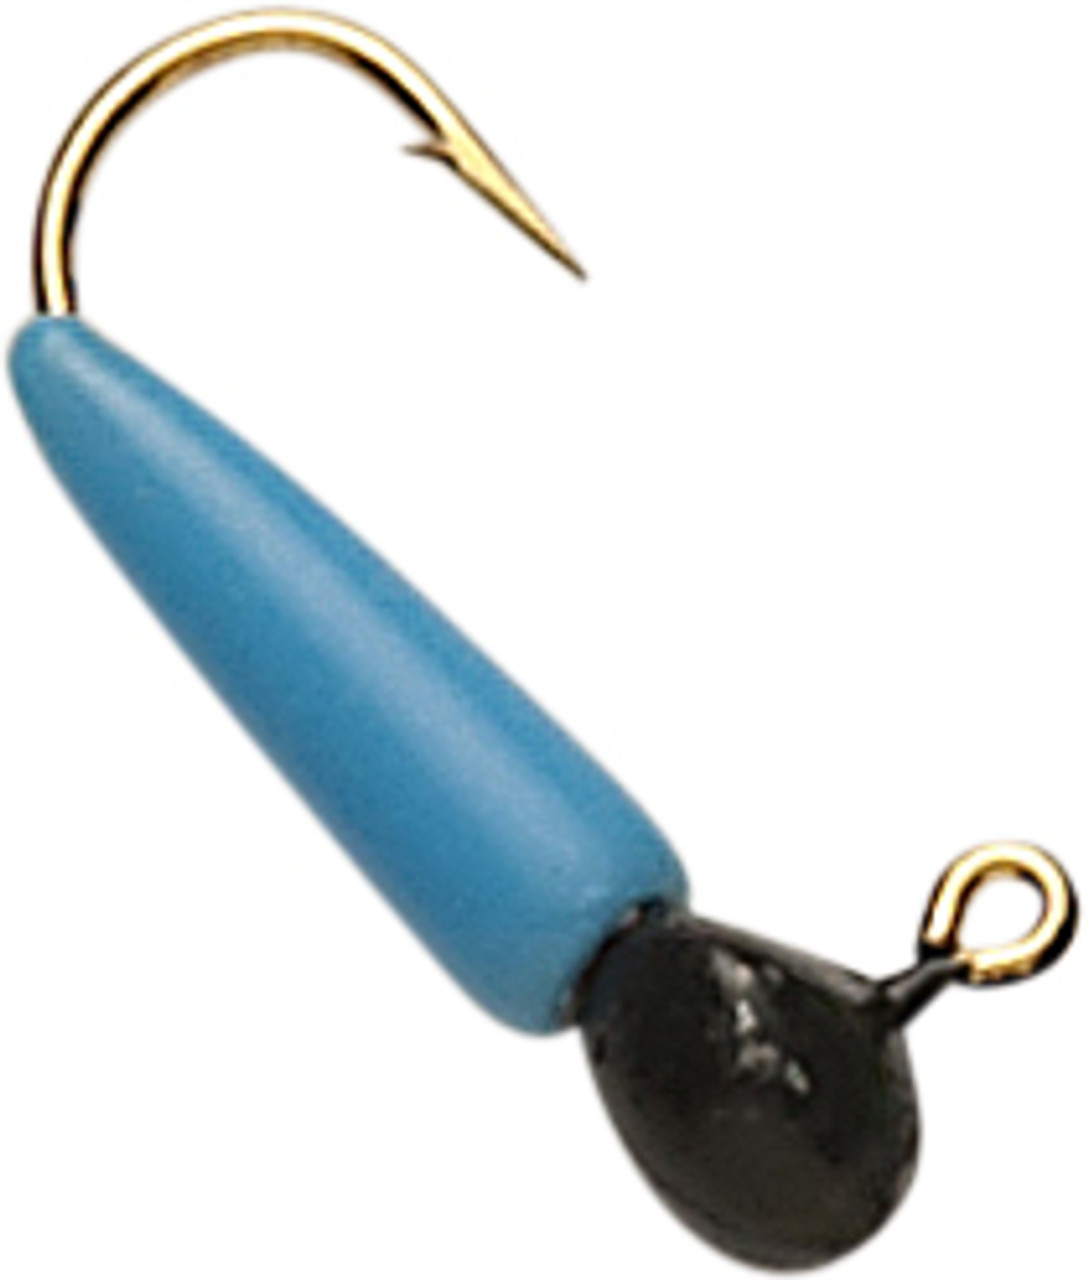 The Best Ice Fishing Jigs of All Time? Introducing the Ratfinkee